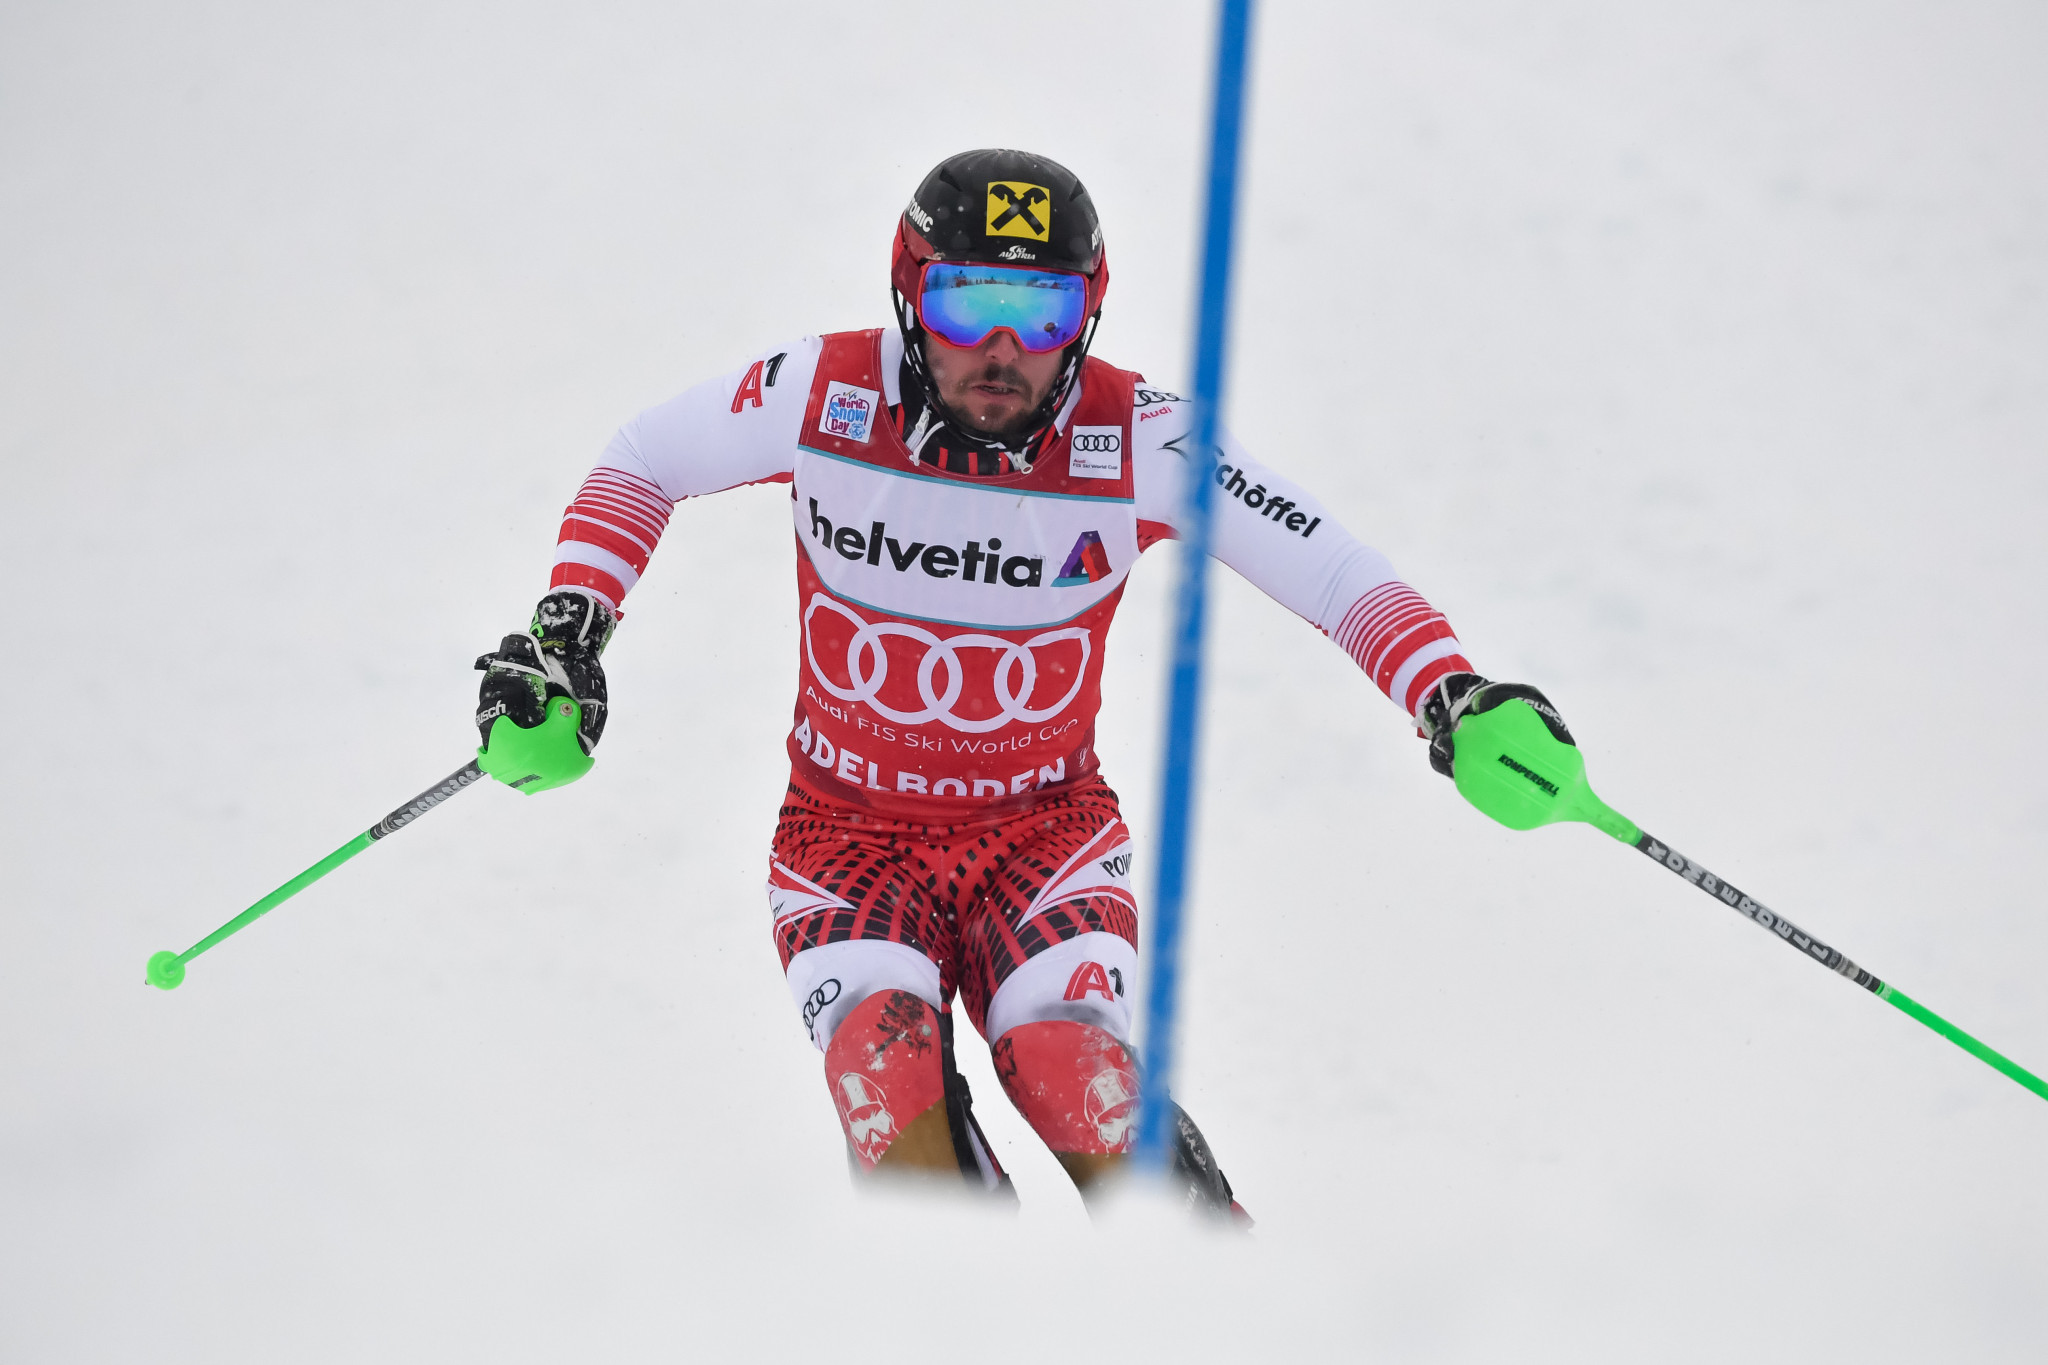 Hirscher slaloms to back-to-back FIS Alpine Skiing World Cup wins in Adelboden